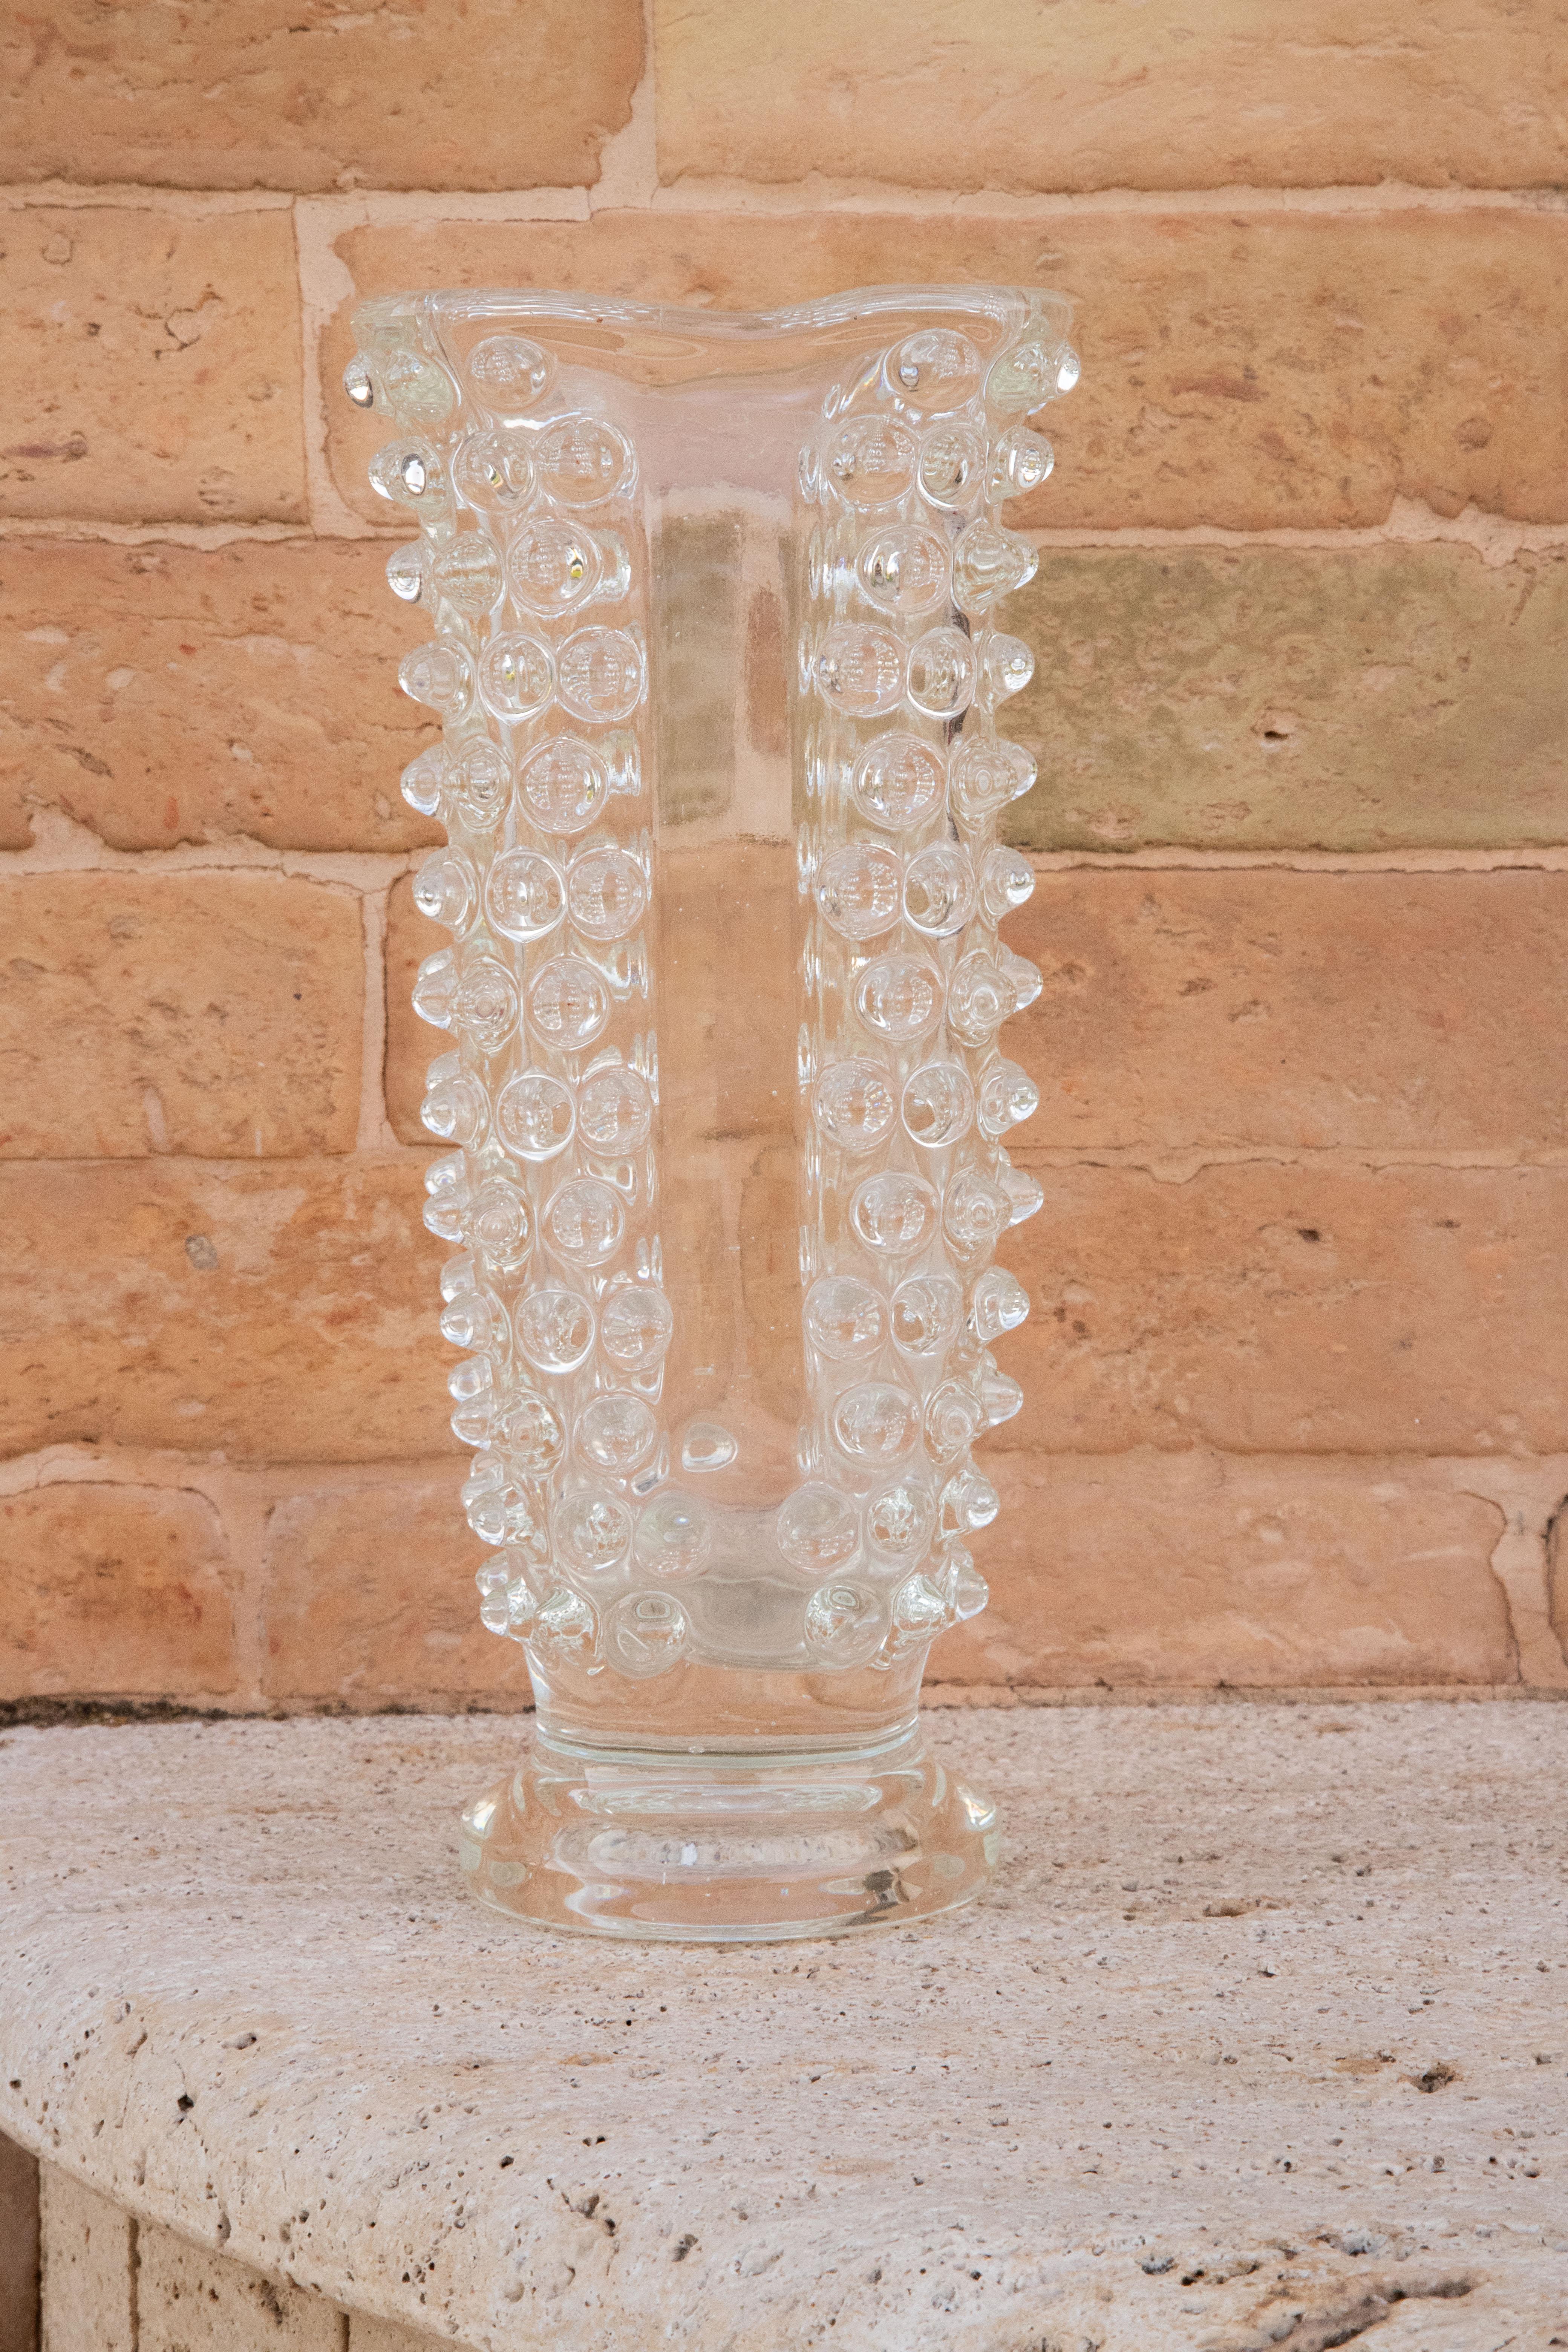 Mouthblown rostrato crystal Murano glass vase. This wonderful piece was produced during the 1940s in Italy by Ercole Barovier for Barovier & Toso.

This item is fantastic thanks to the incredible workmanship of the Rostrato glass will match